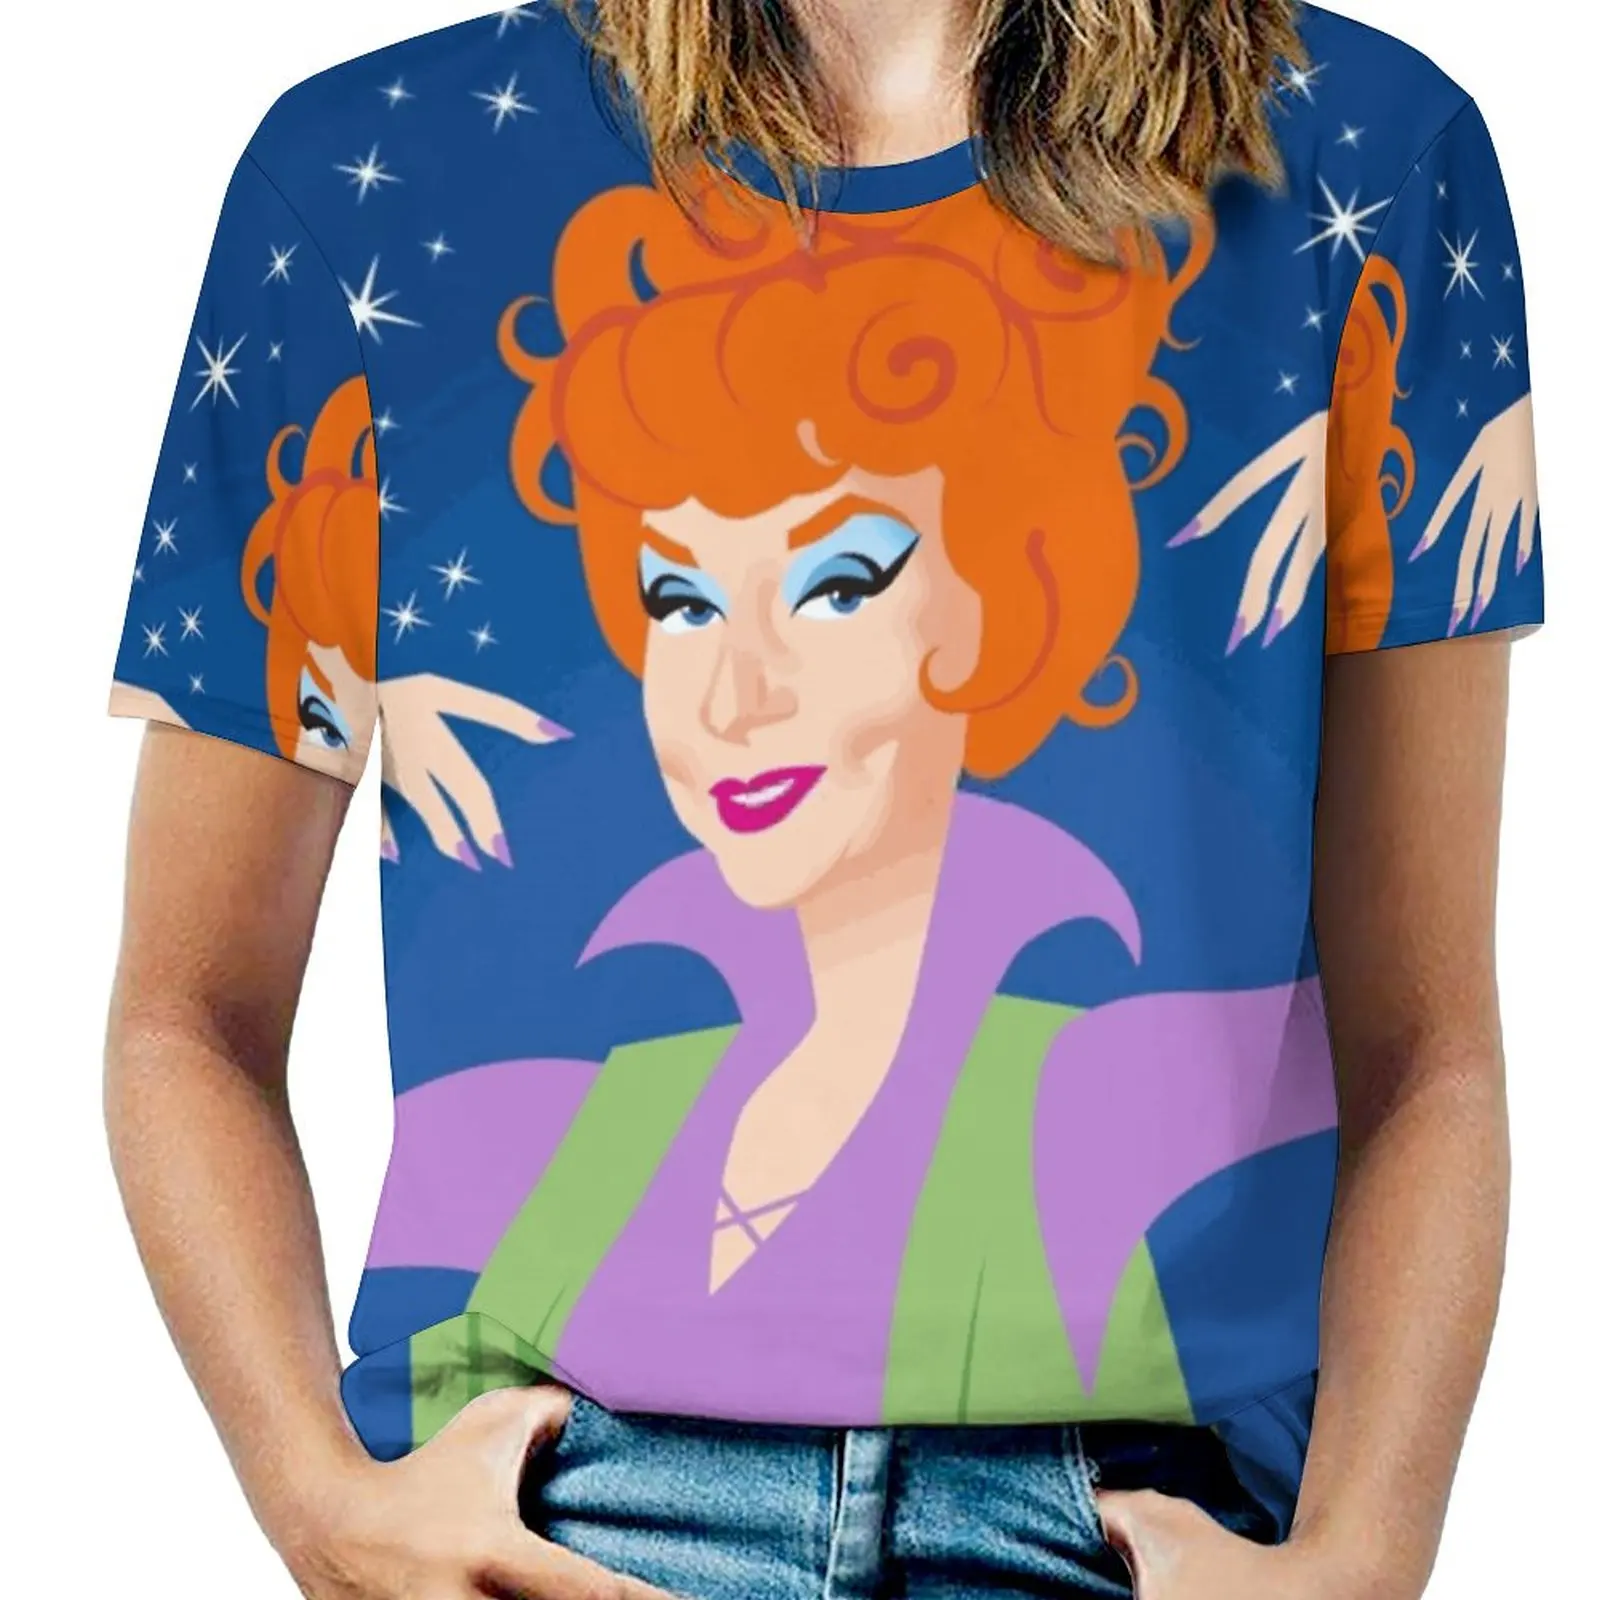 Endora Woman'S T-Shirt Spring And Summer Printed T Shirts Crew Neck Pullover Top Agnes Moorhead Endara Bewitched Tv Series